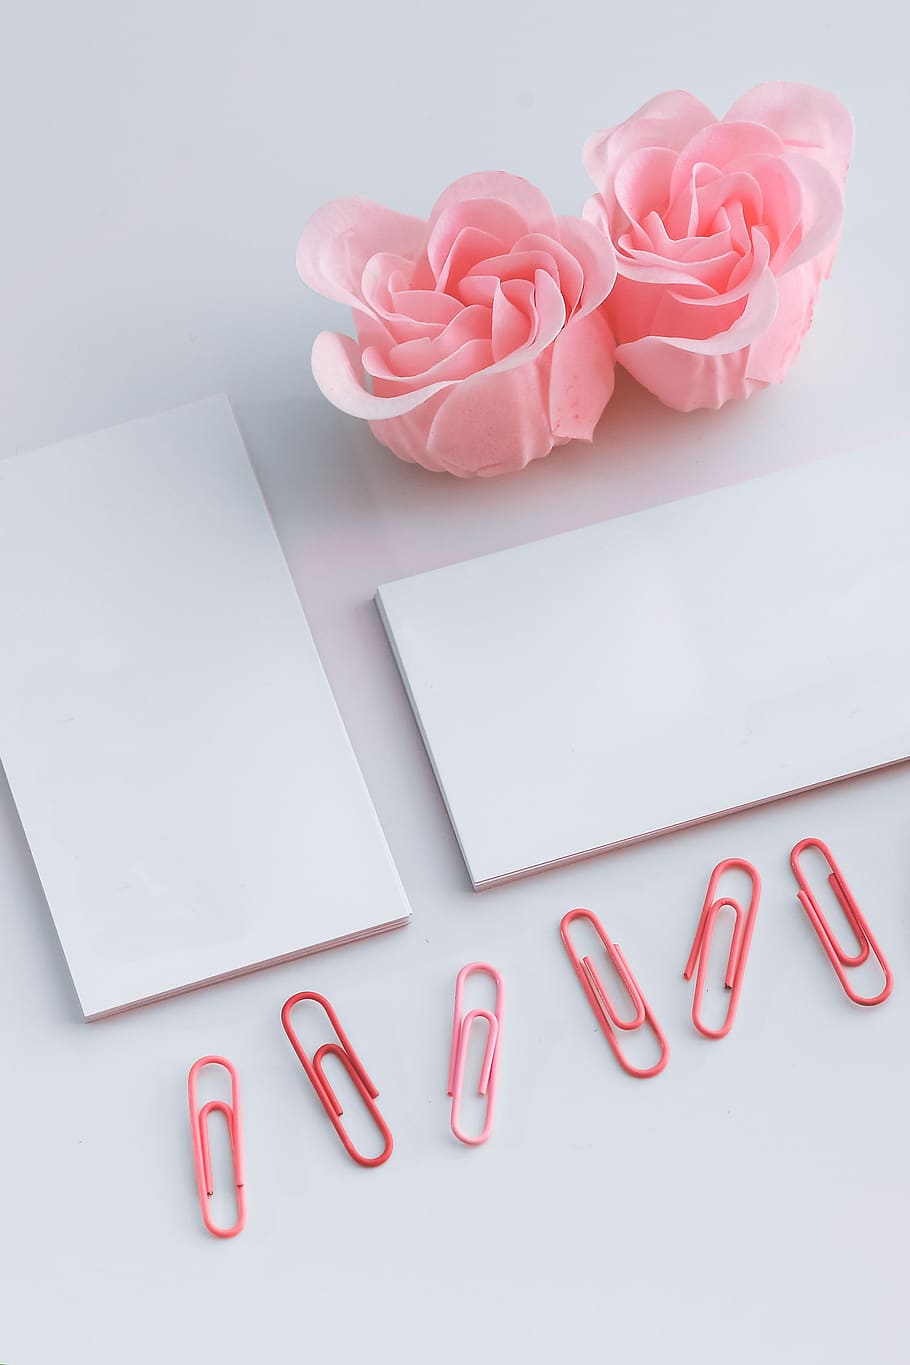 female, roses, minimal, copy space, empty, pink, femine, paper, business card, paper clip